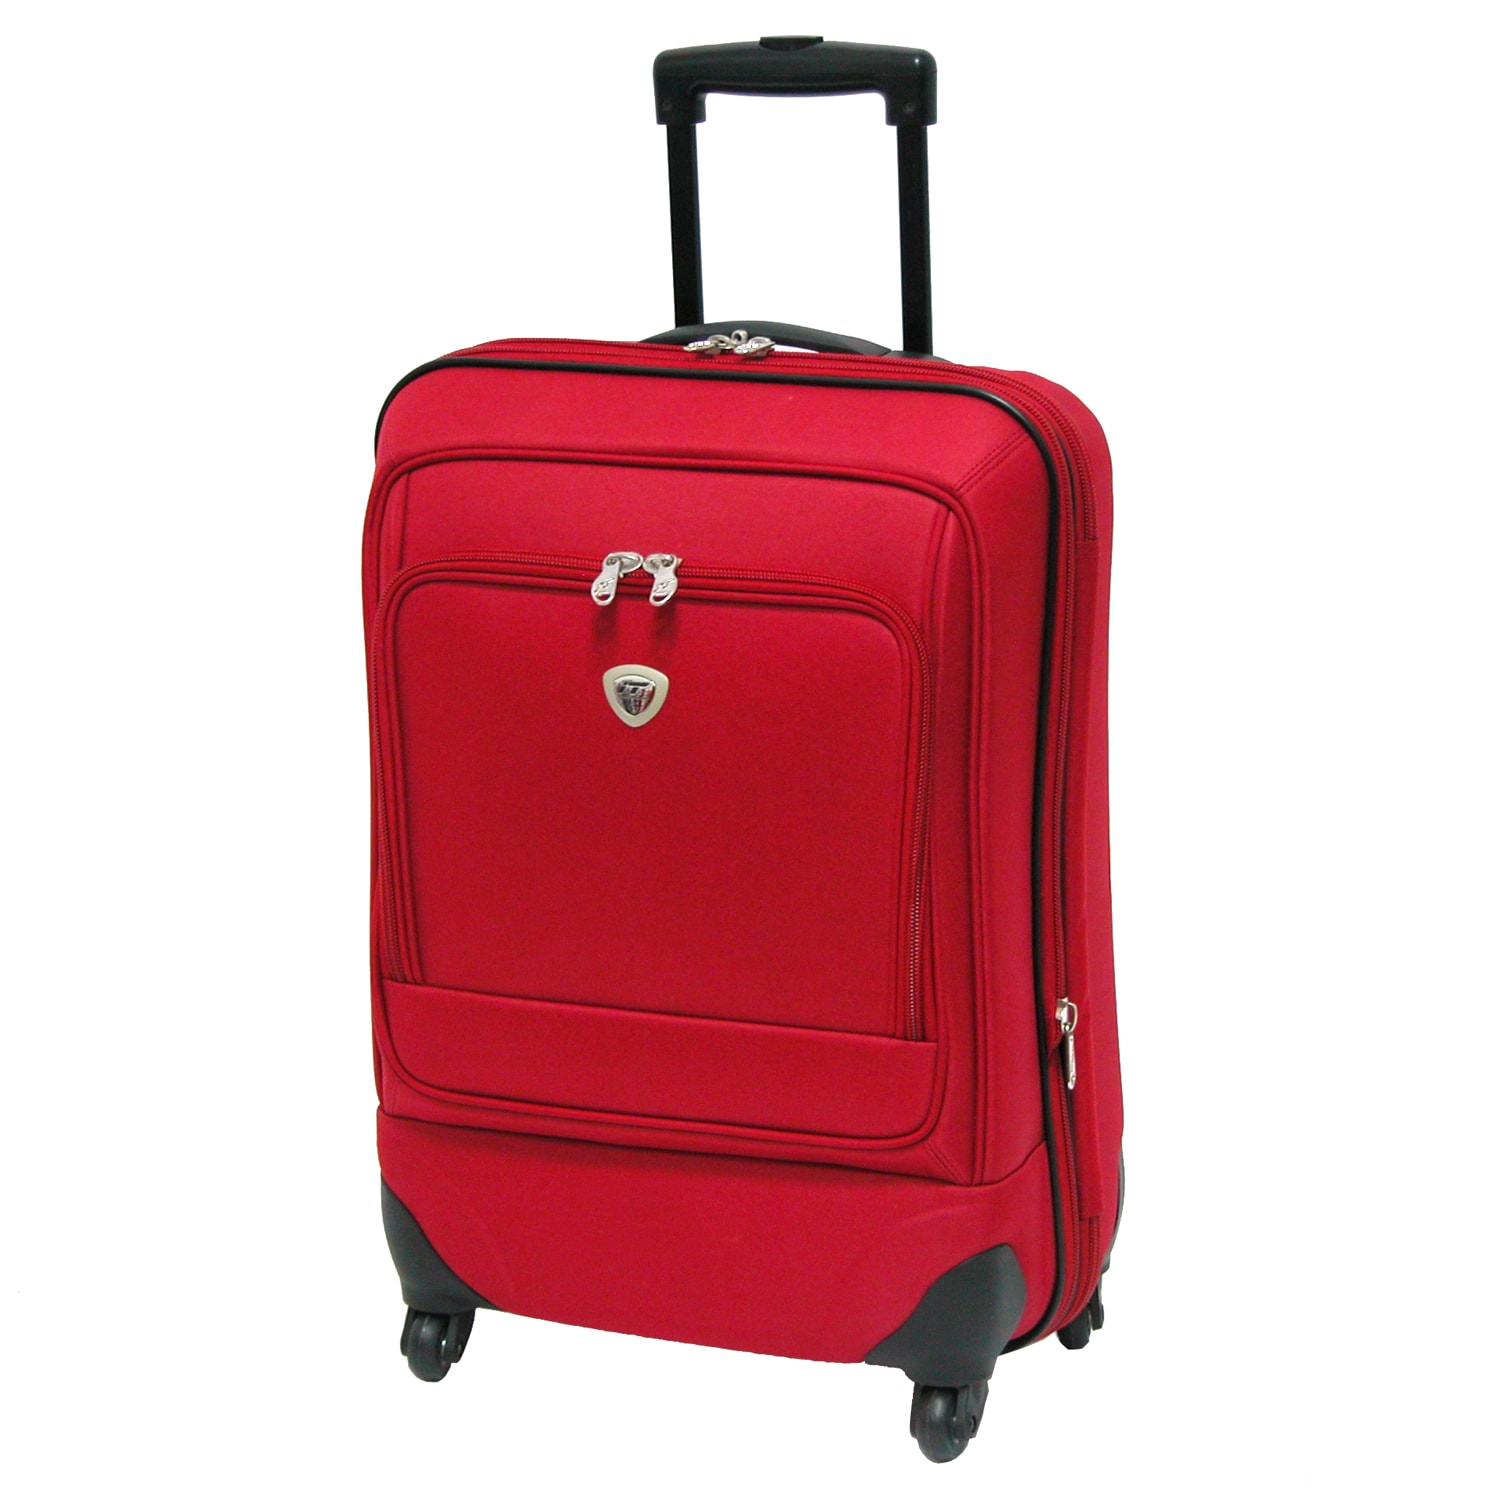 Shop International Traveller Ion 22inch Carryon Luggage Overstock